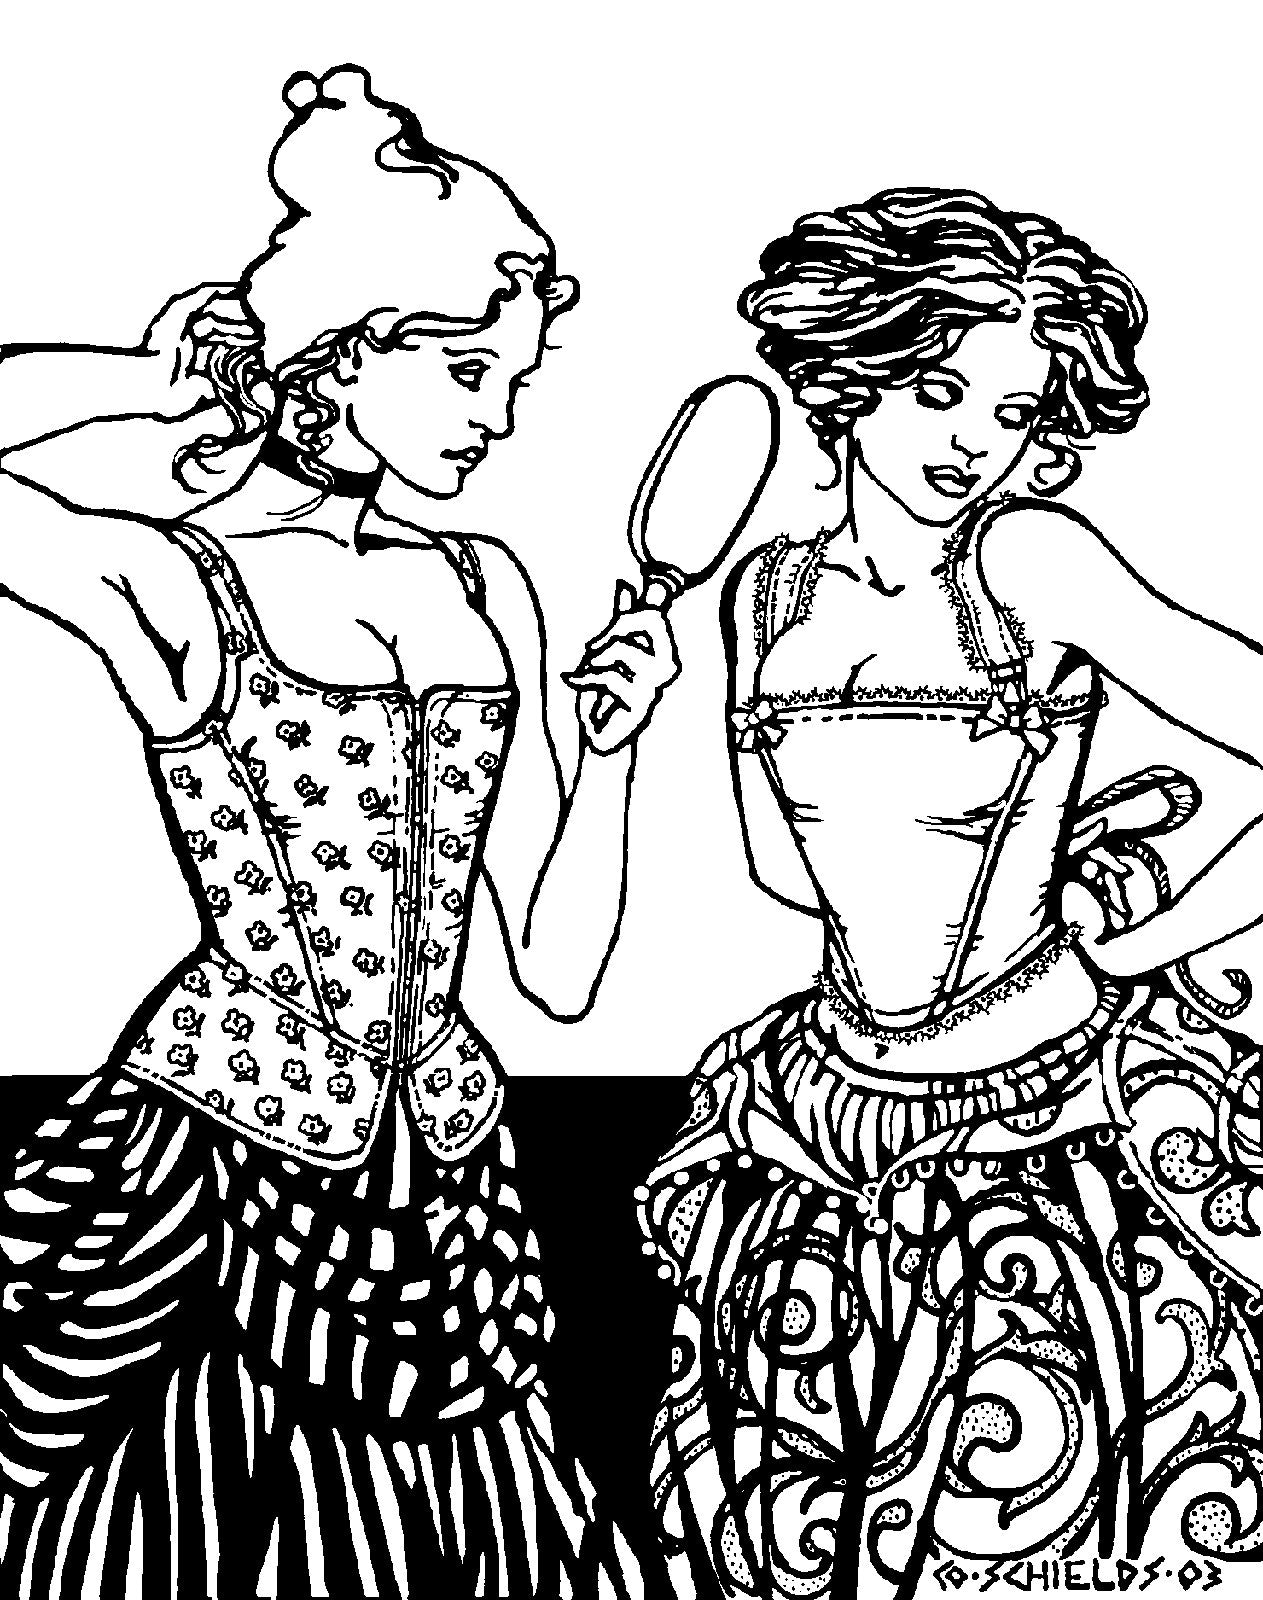 Black and white pen and ink drawing by artist Gretchen Shields.  Two women wearing the #267 Lady's Corset,, woman on the right is looking in a hand held mirror, woman on the right is tying her corset